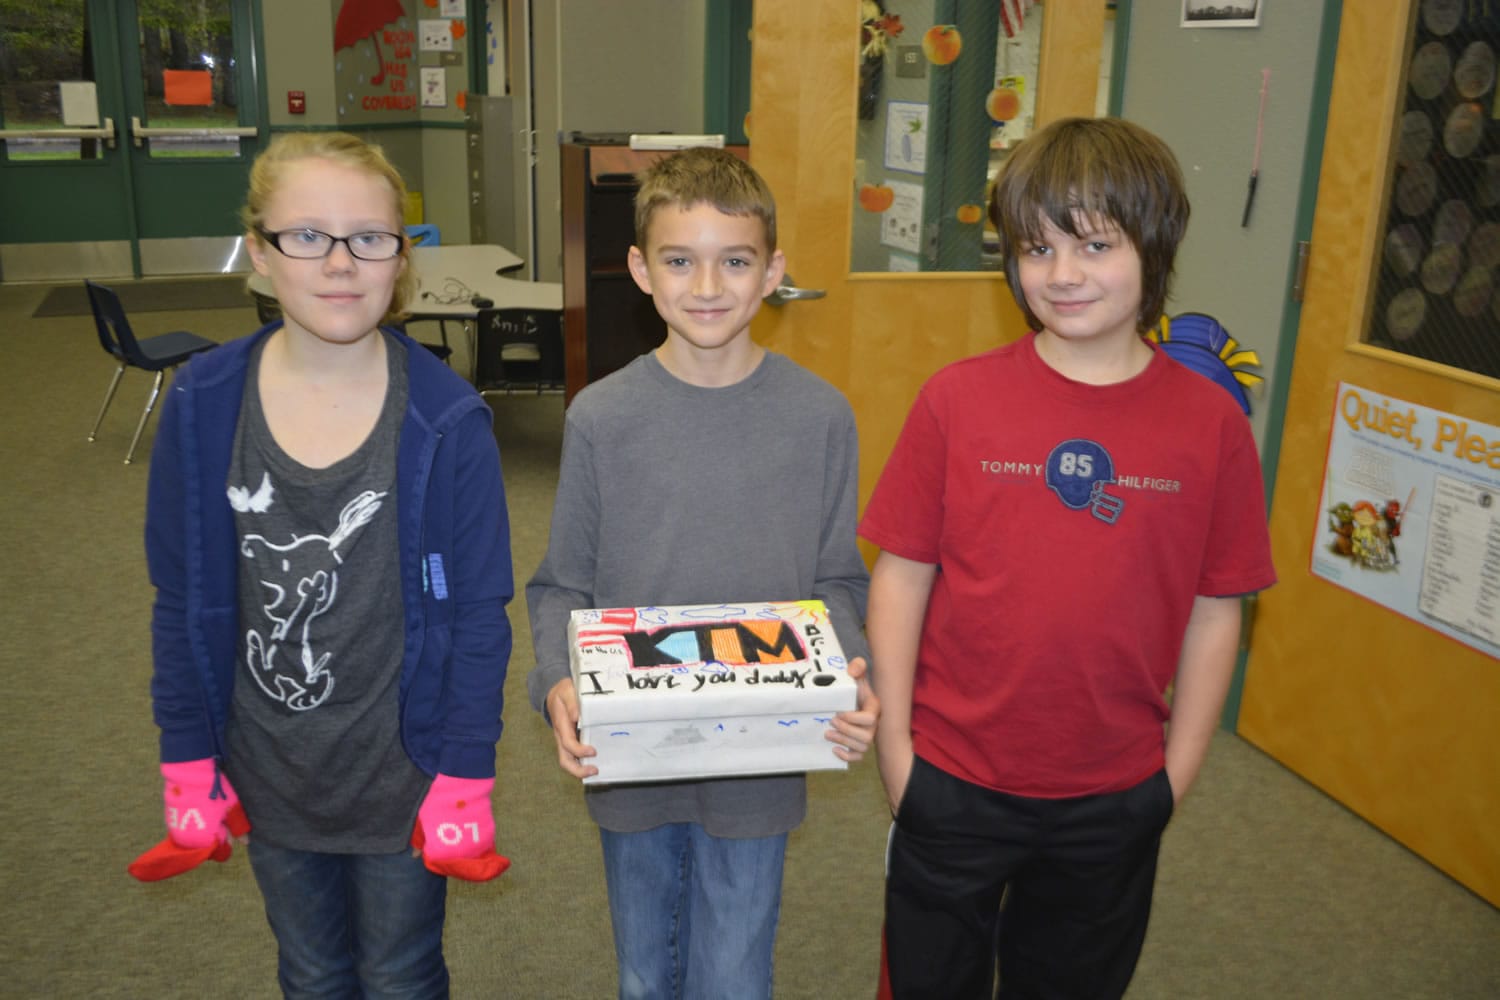 Washougal: Cape Horn-Skye Elementary School fourth-graders Briana Kistner, from left, Aiden Imel and Chase Delp help prepare treats and words of encouragement to be sent to military members serving overseas.